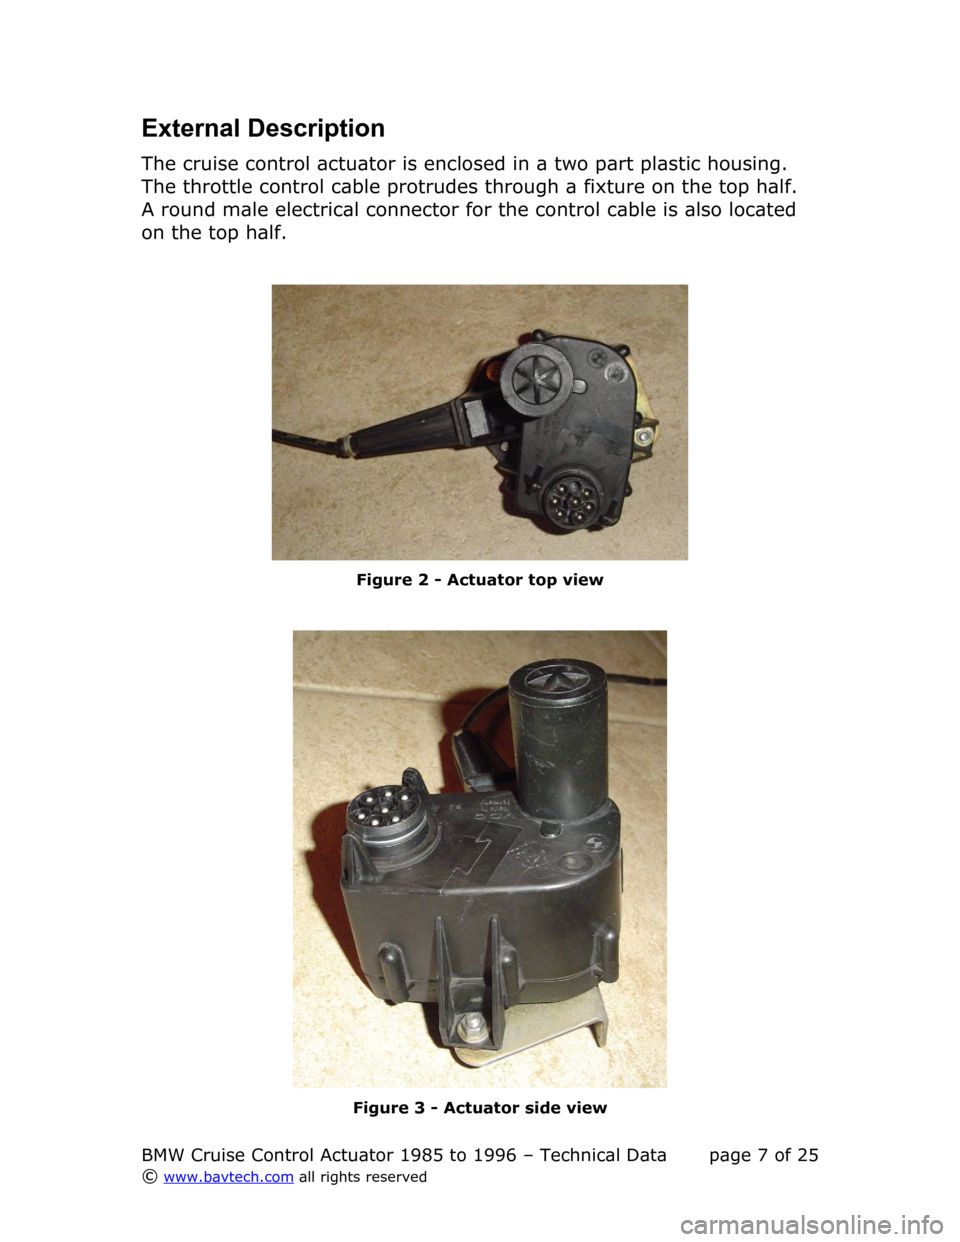 BMW 5 SERIES 1990 E34 Cruise Control Acutator External Description
The cruise control actuator is enclosed in a two part plastic housing.  
The throttle control cable protrudes through a fixture on the top half.  
A round male electrical connecto